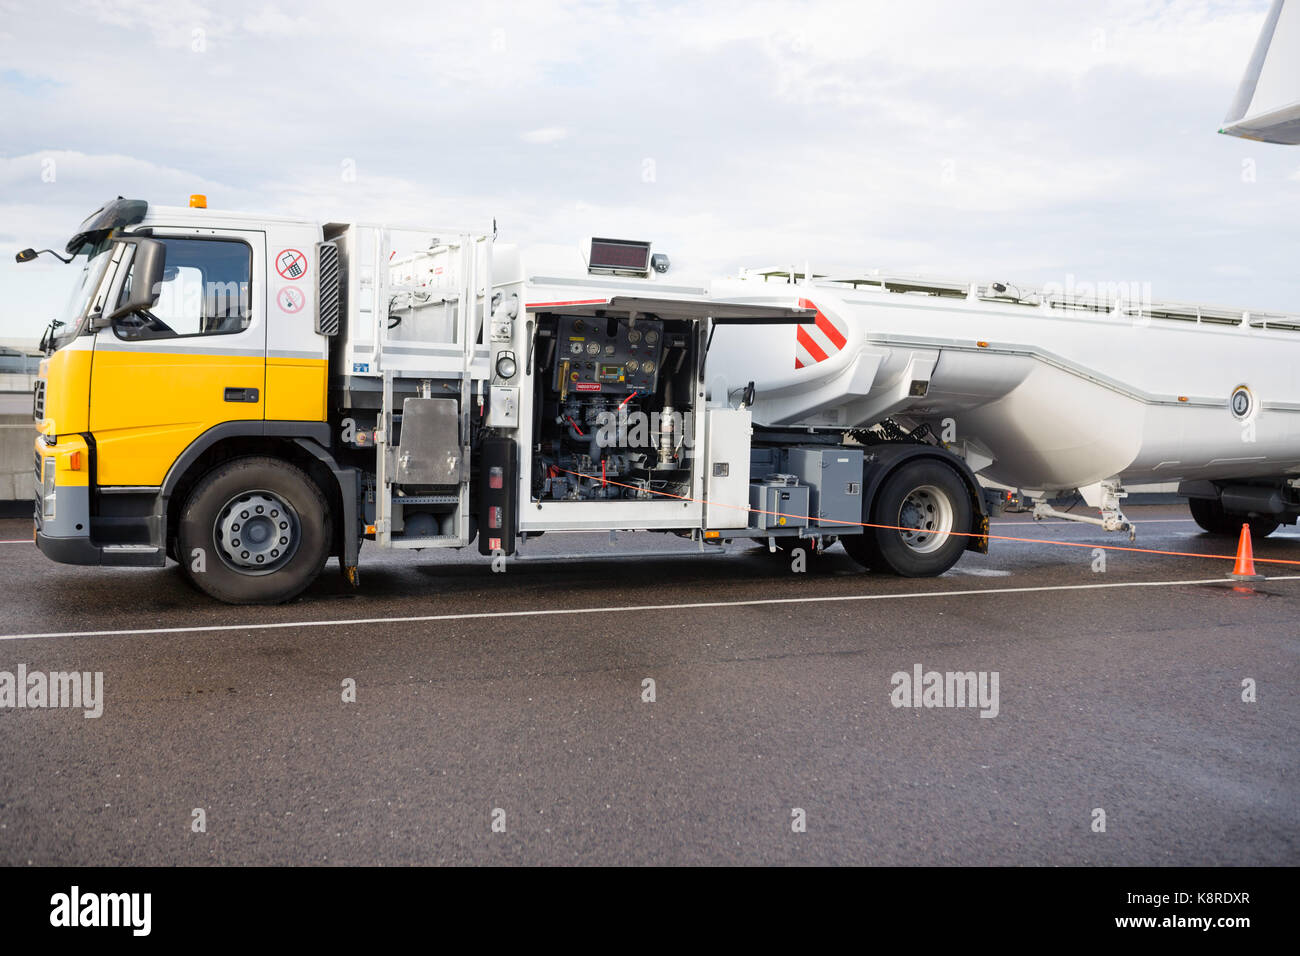 Fuel Truck On Wet Runway At Airport Stock Photo